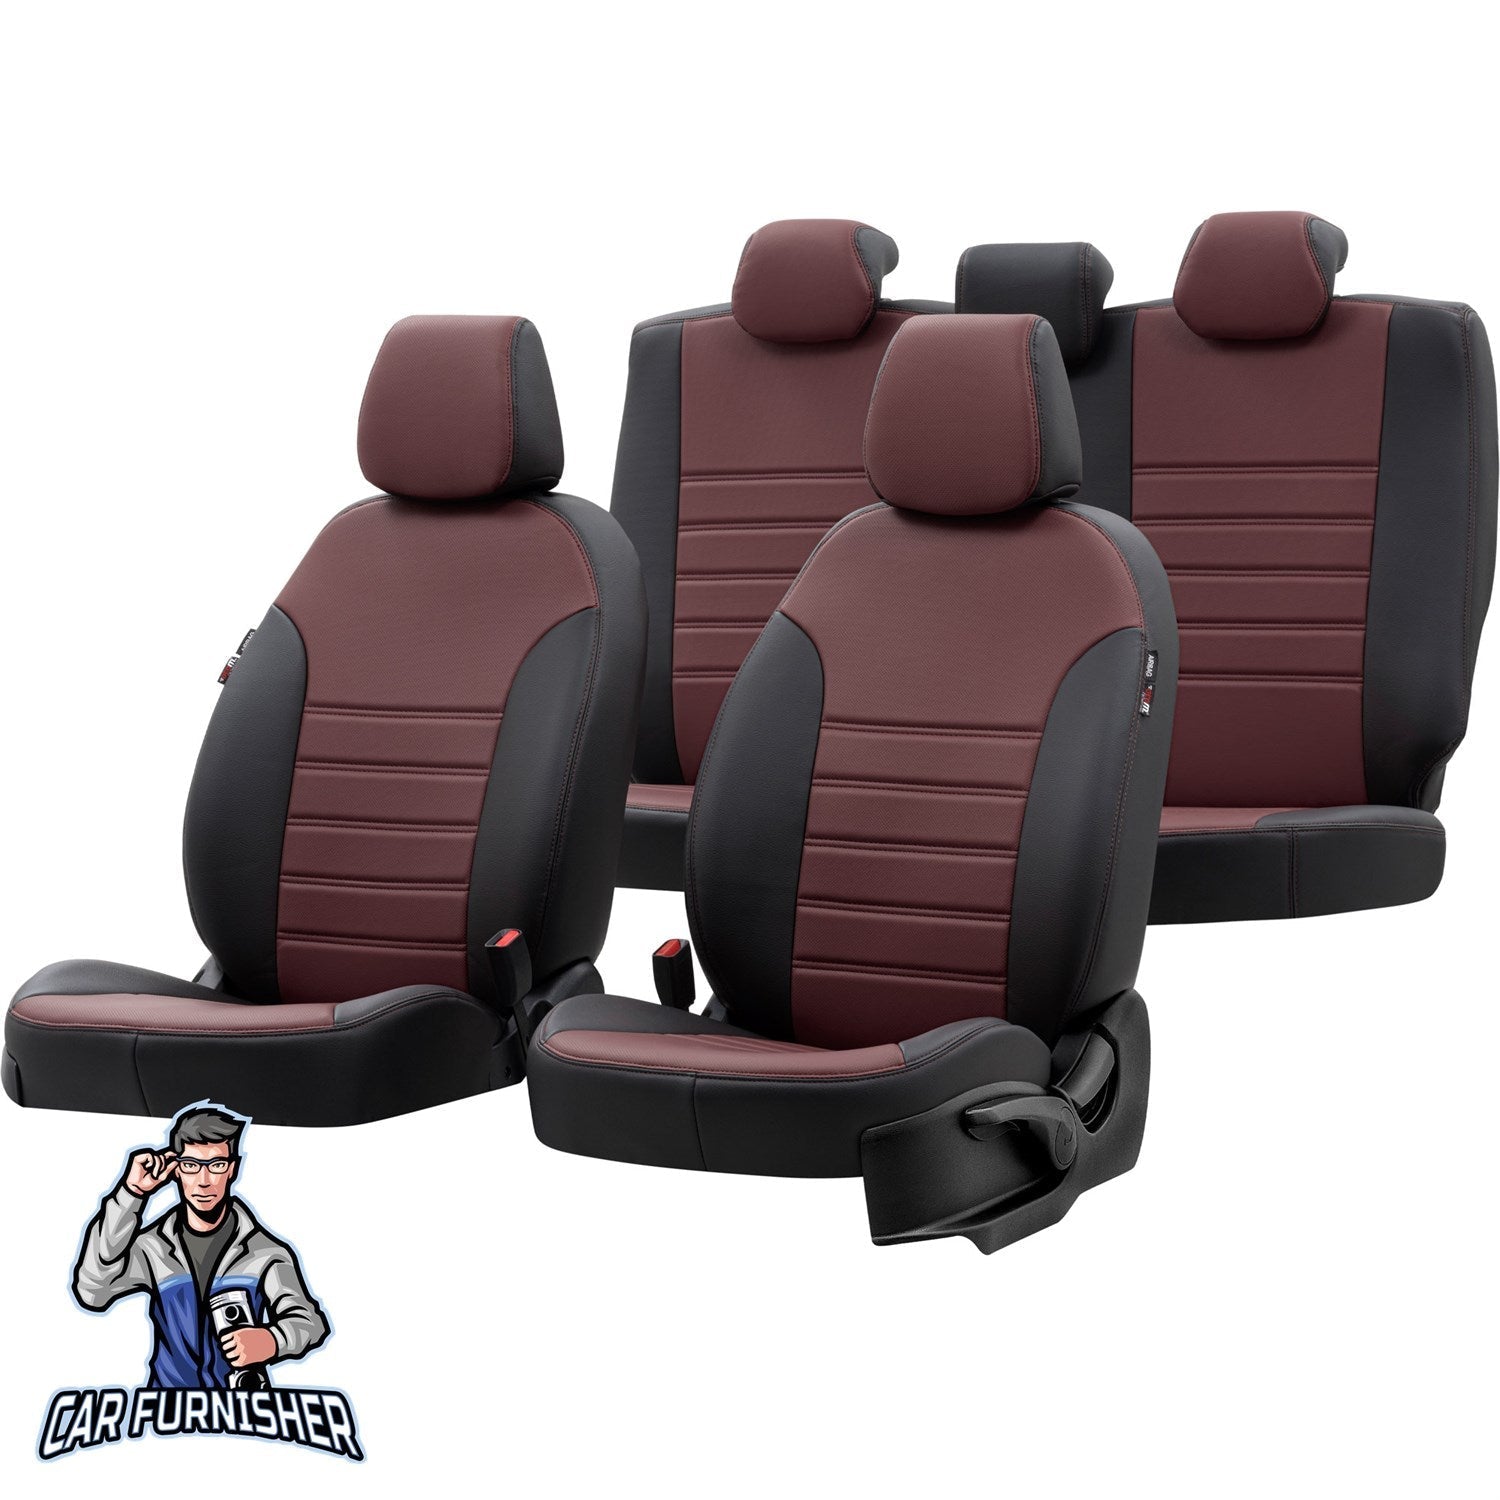 Fiat Tempra Seat Covers Istanbul Leather Design Burgundy Leather